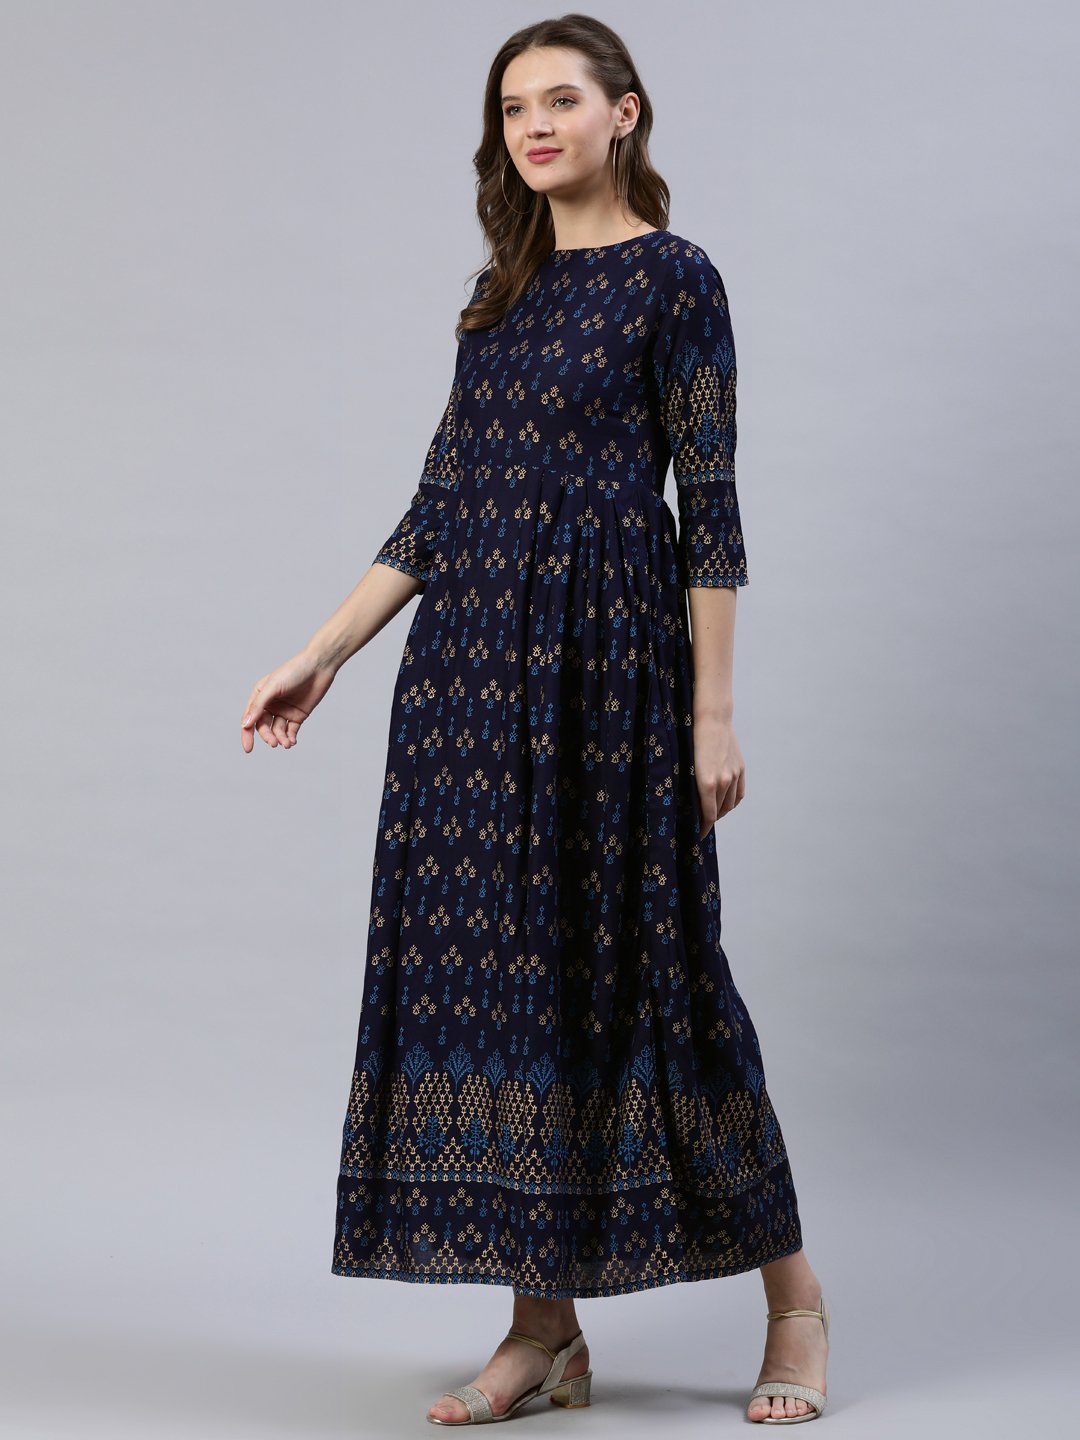 Women's Navy Blue & Gold Printed Dress With Three Quarter Sleeves - Nayo Clothing